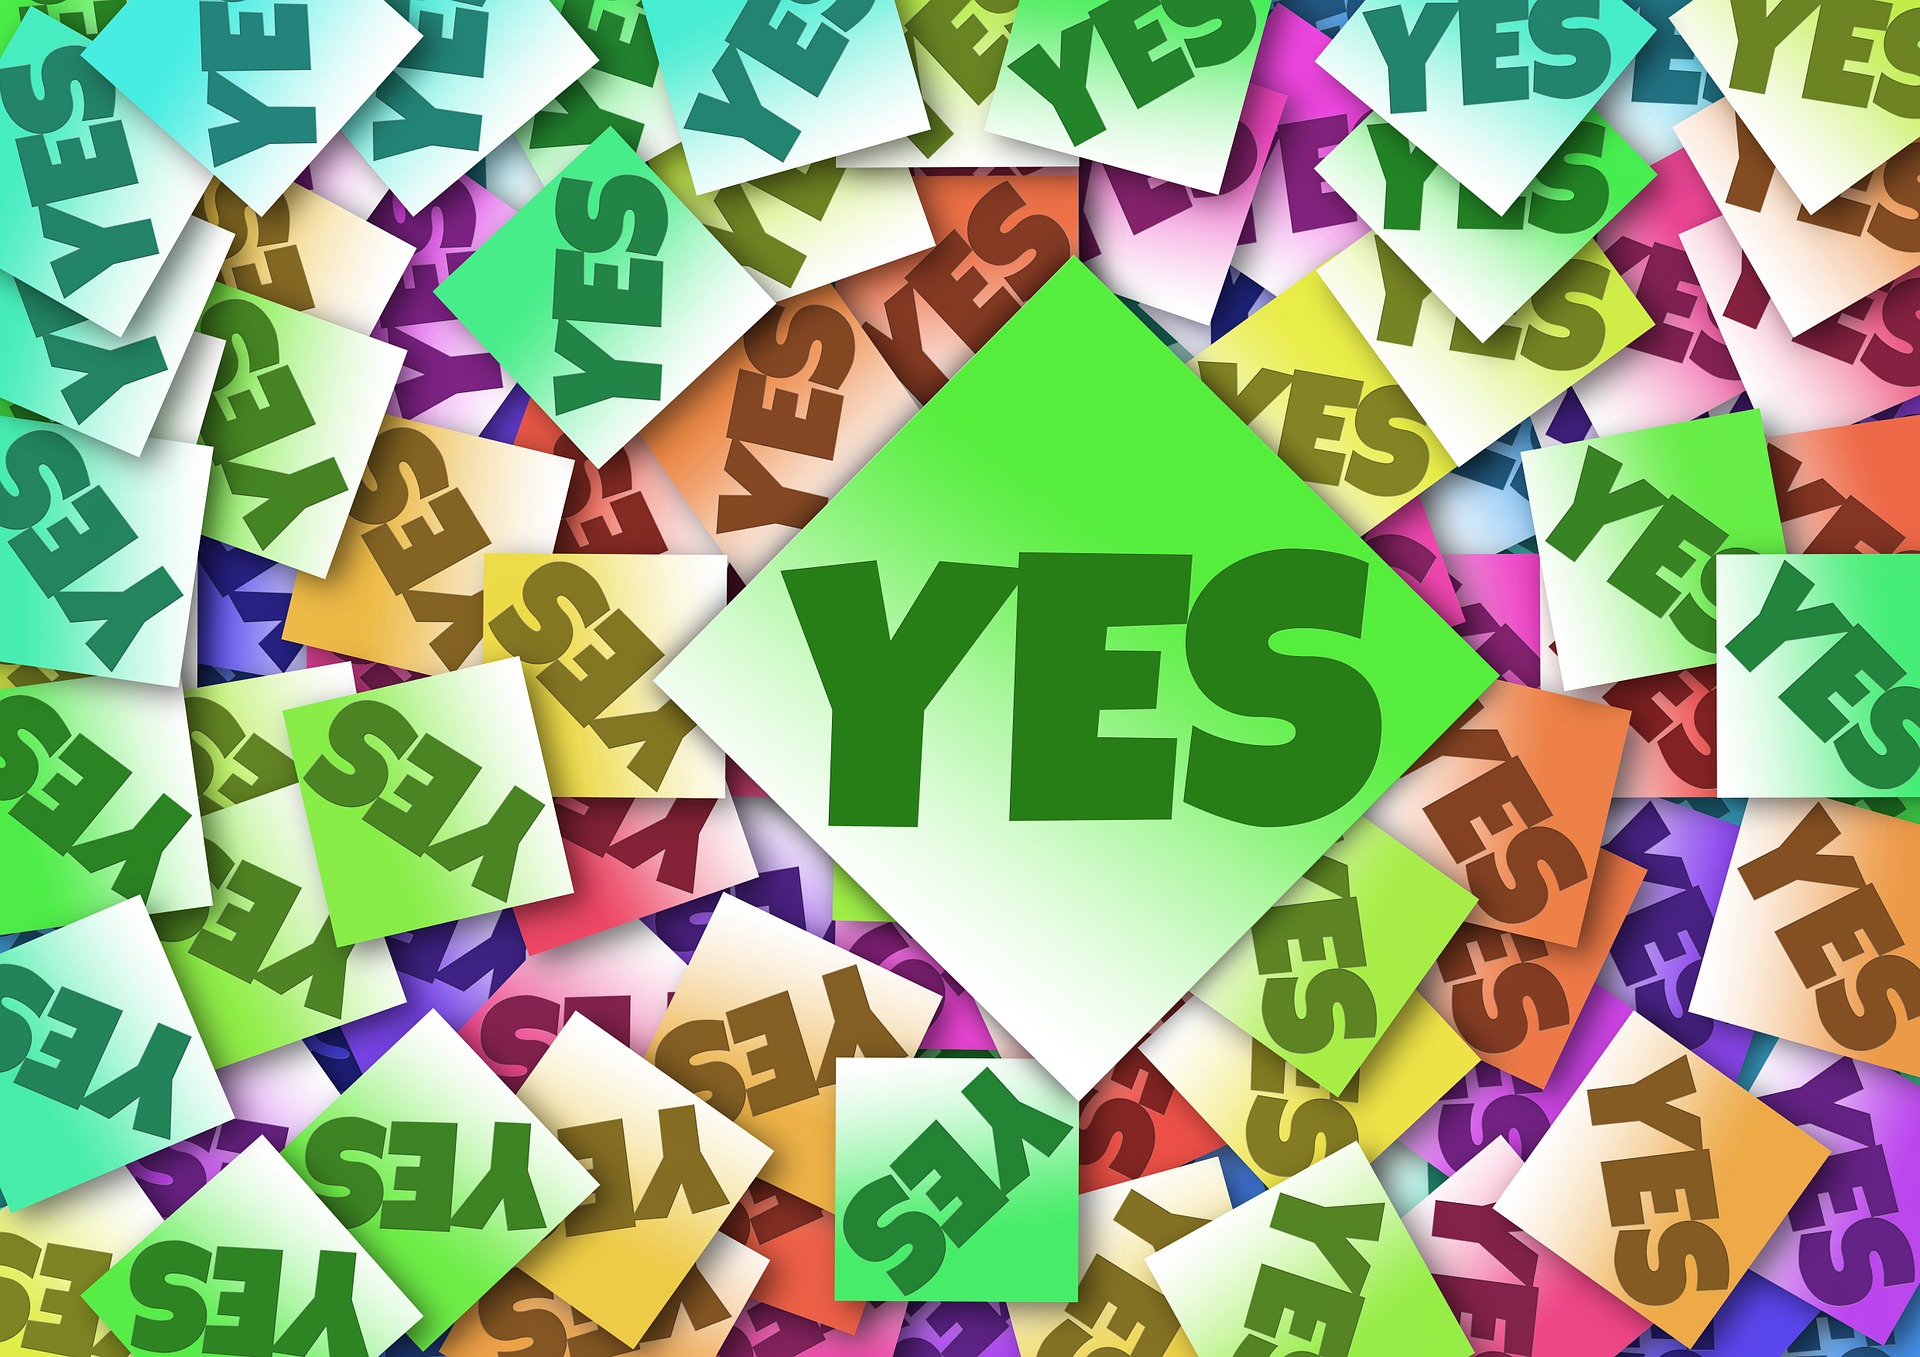 Sales training - helping customers to say yes